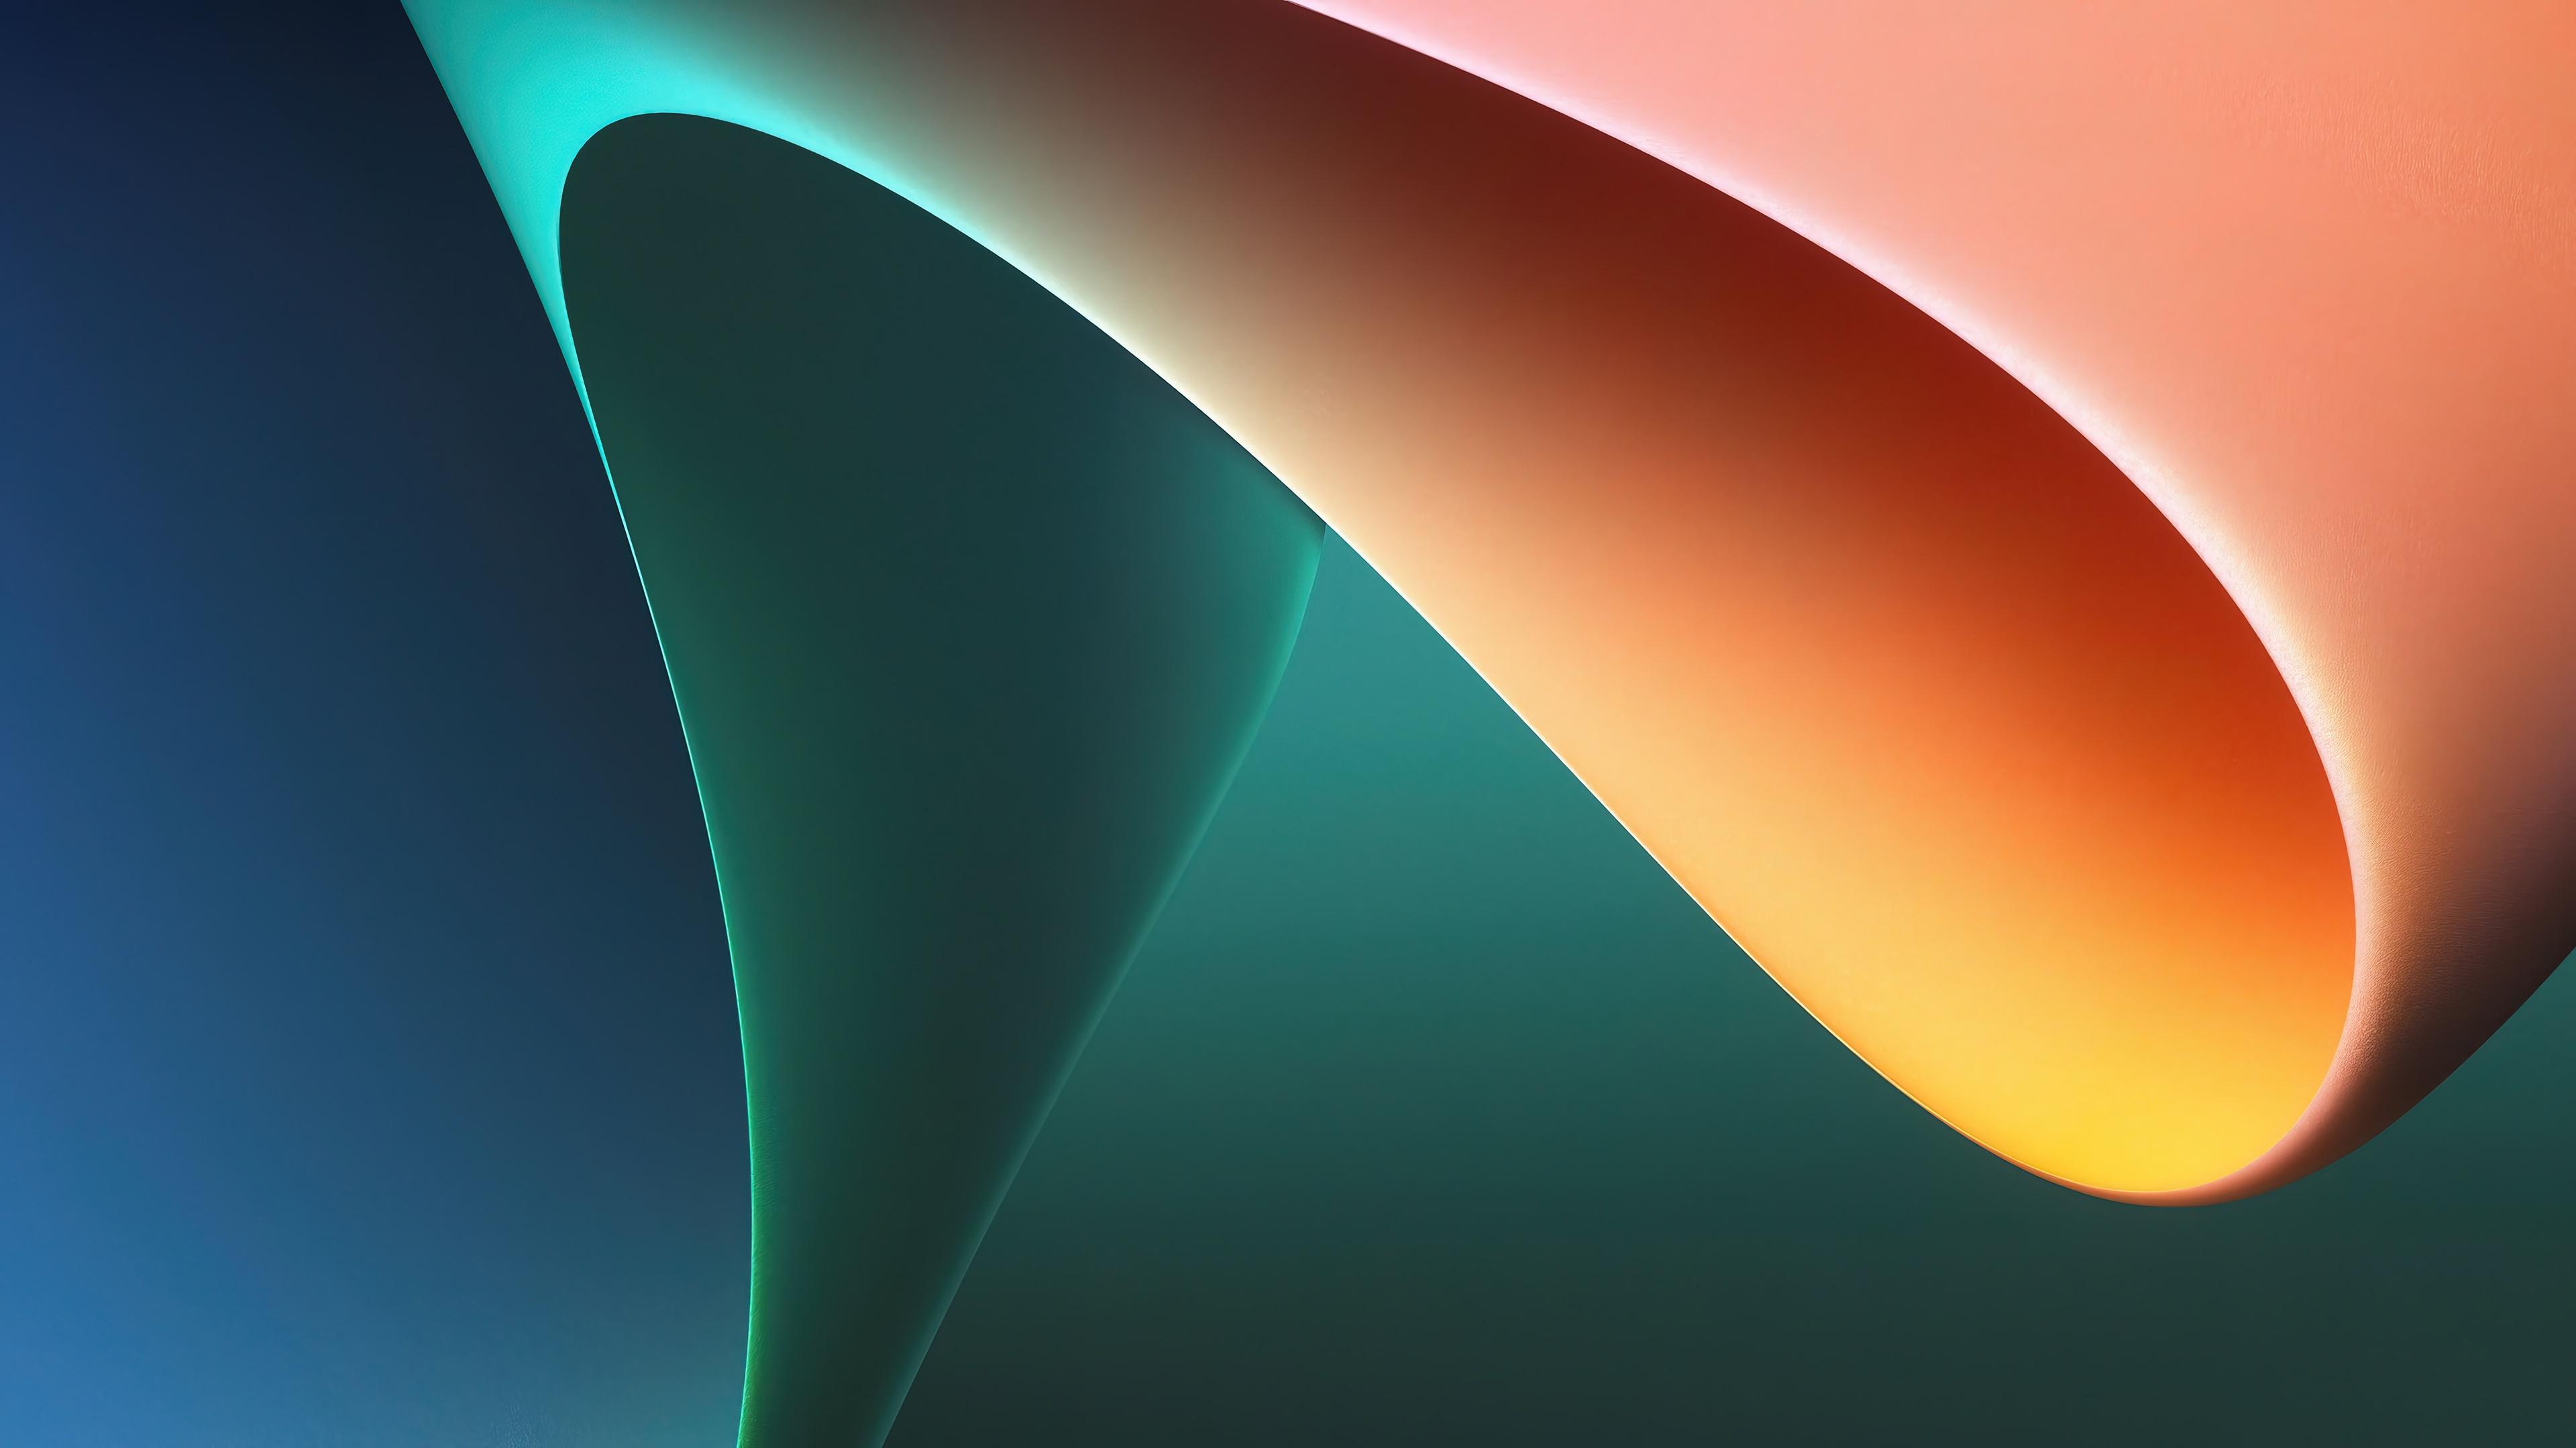 Abstract Colorful Os Background 4k Rare Gallery HD